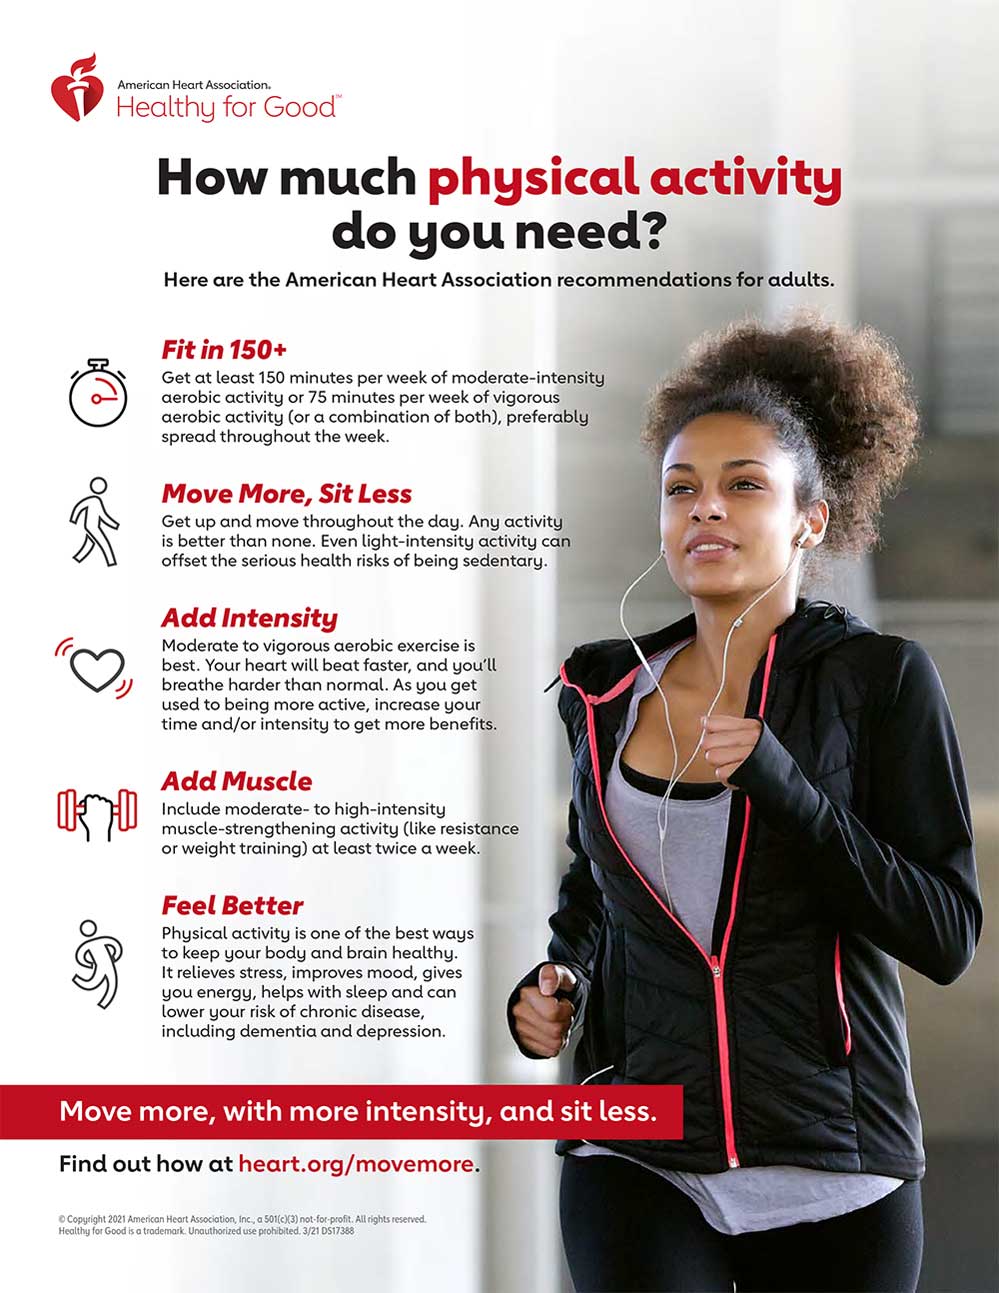 American Heart Association Recommendations for Physical Activity in Adults  and Kids